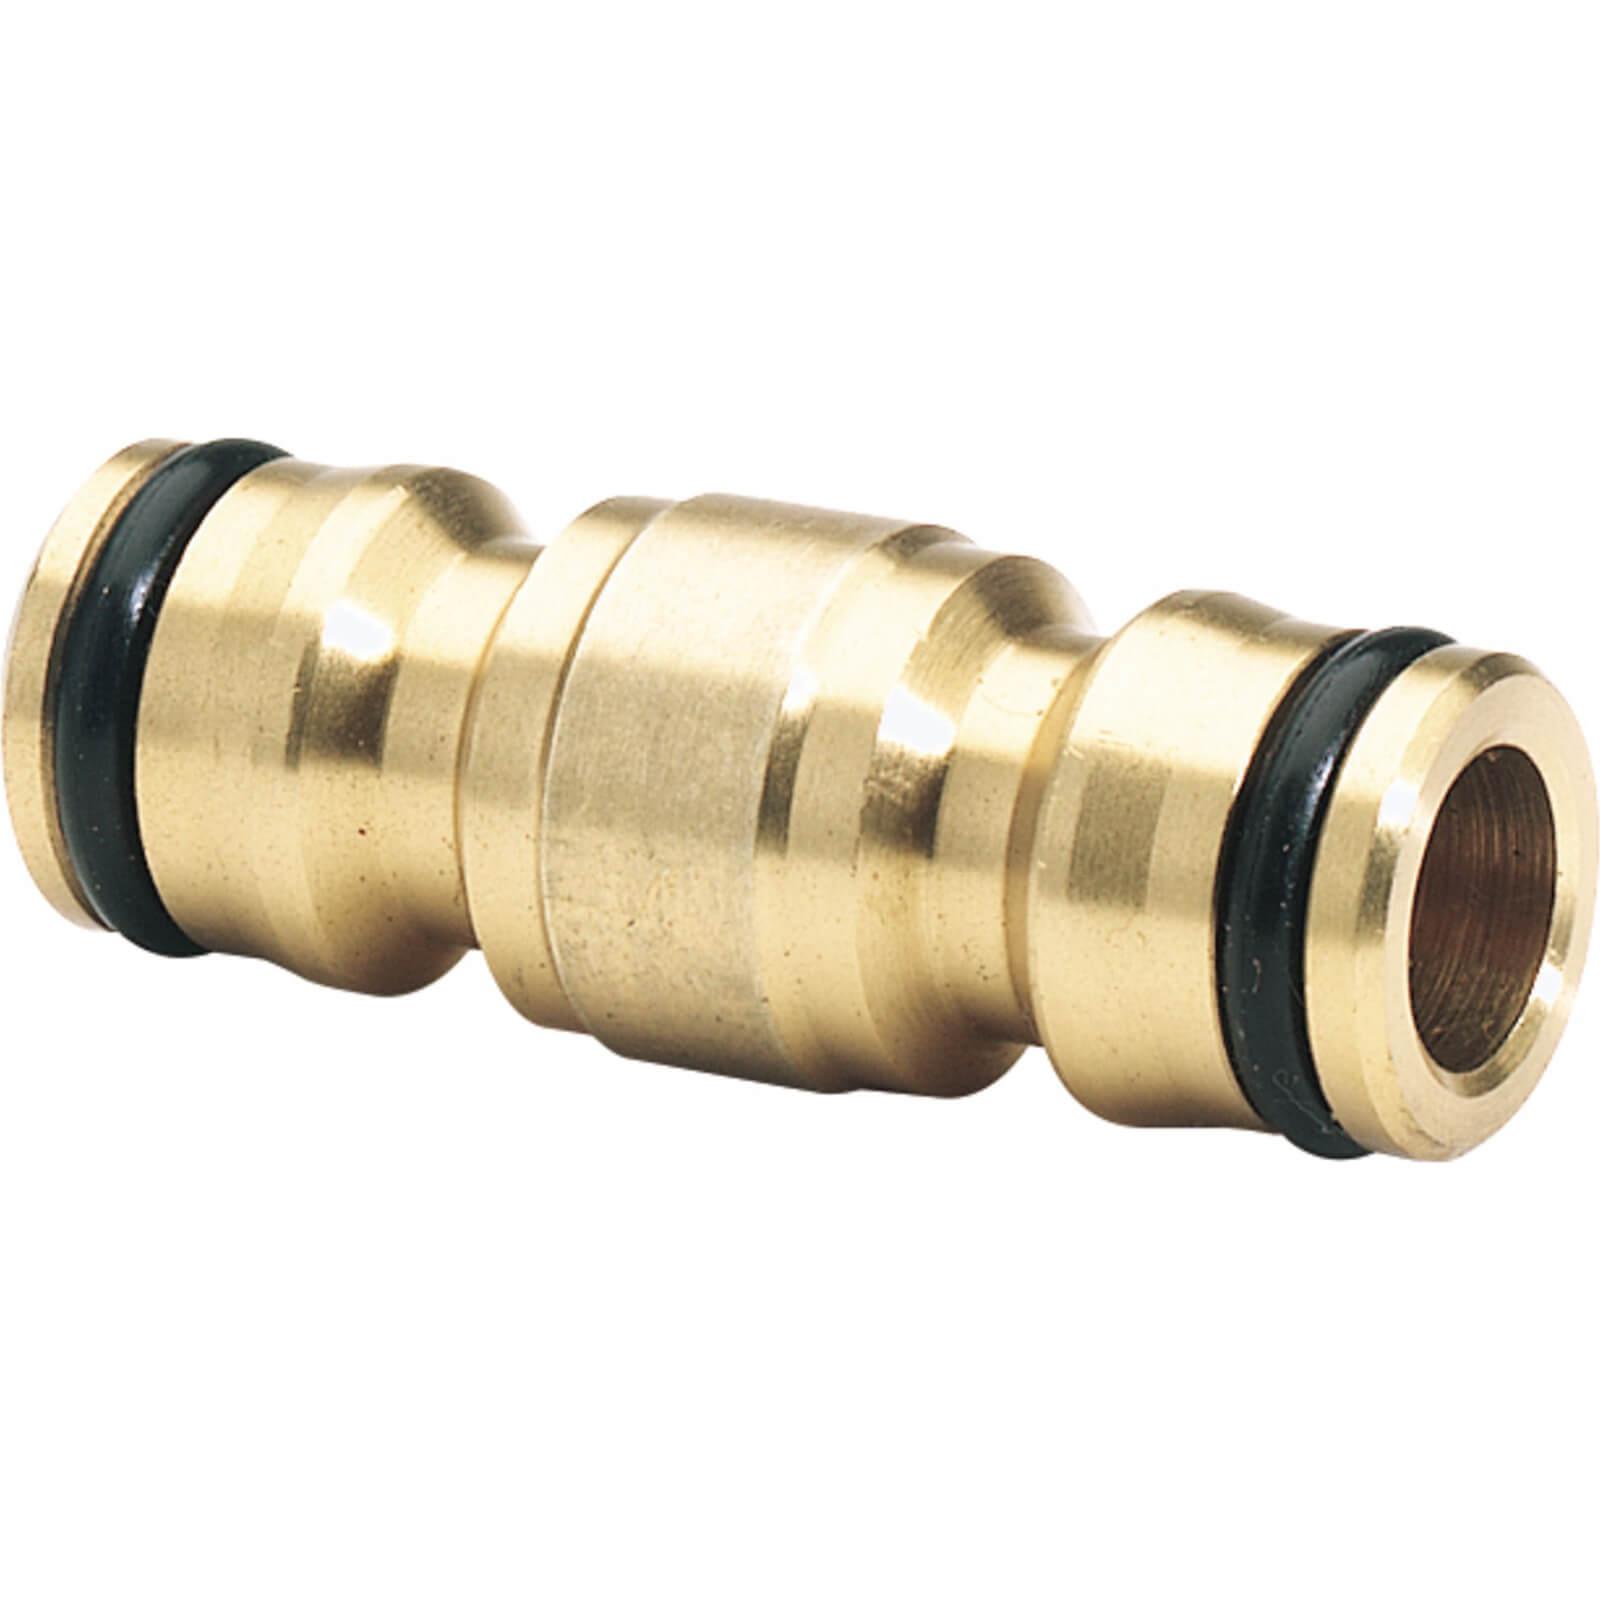 Photo of Draper Expert Two Way Garden Hose Pipe Coupling Connector 1/2